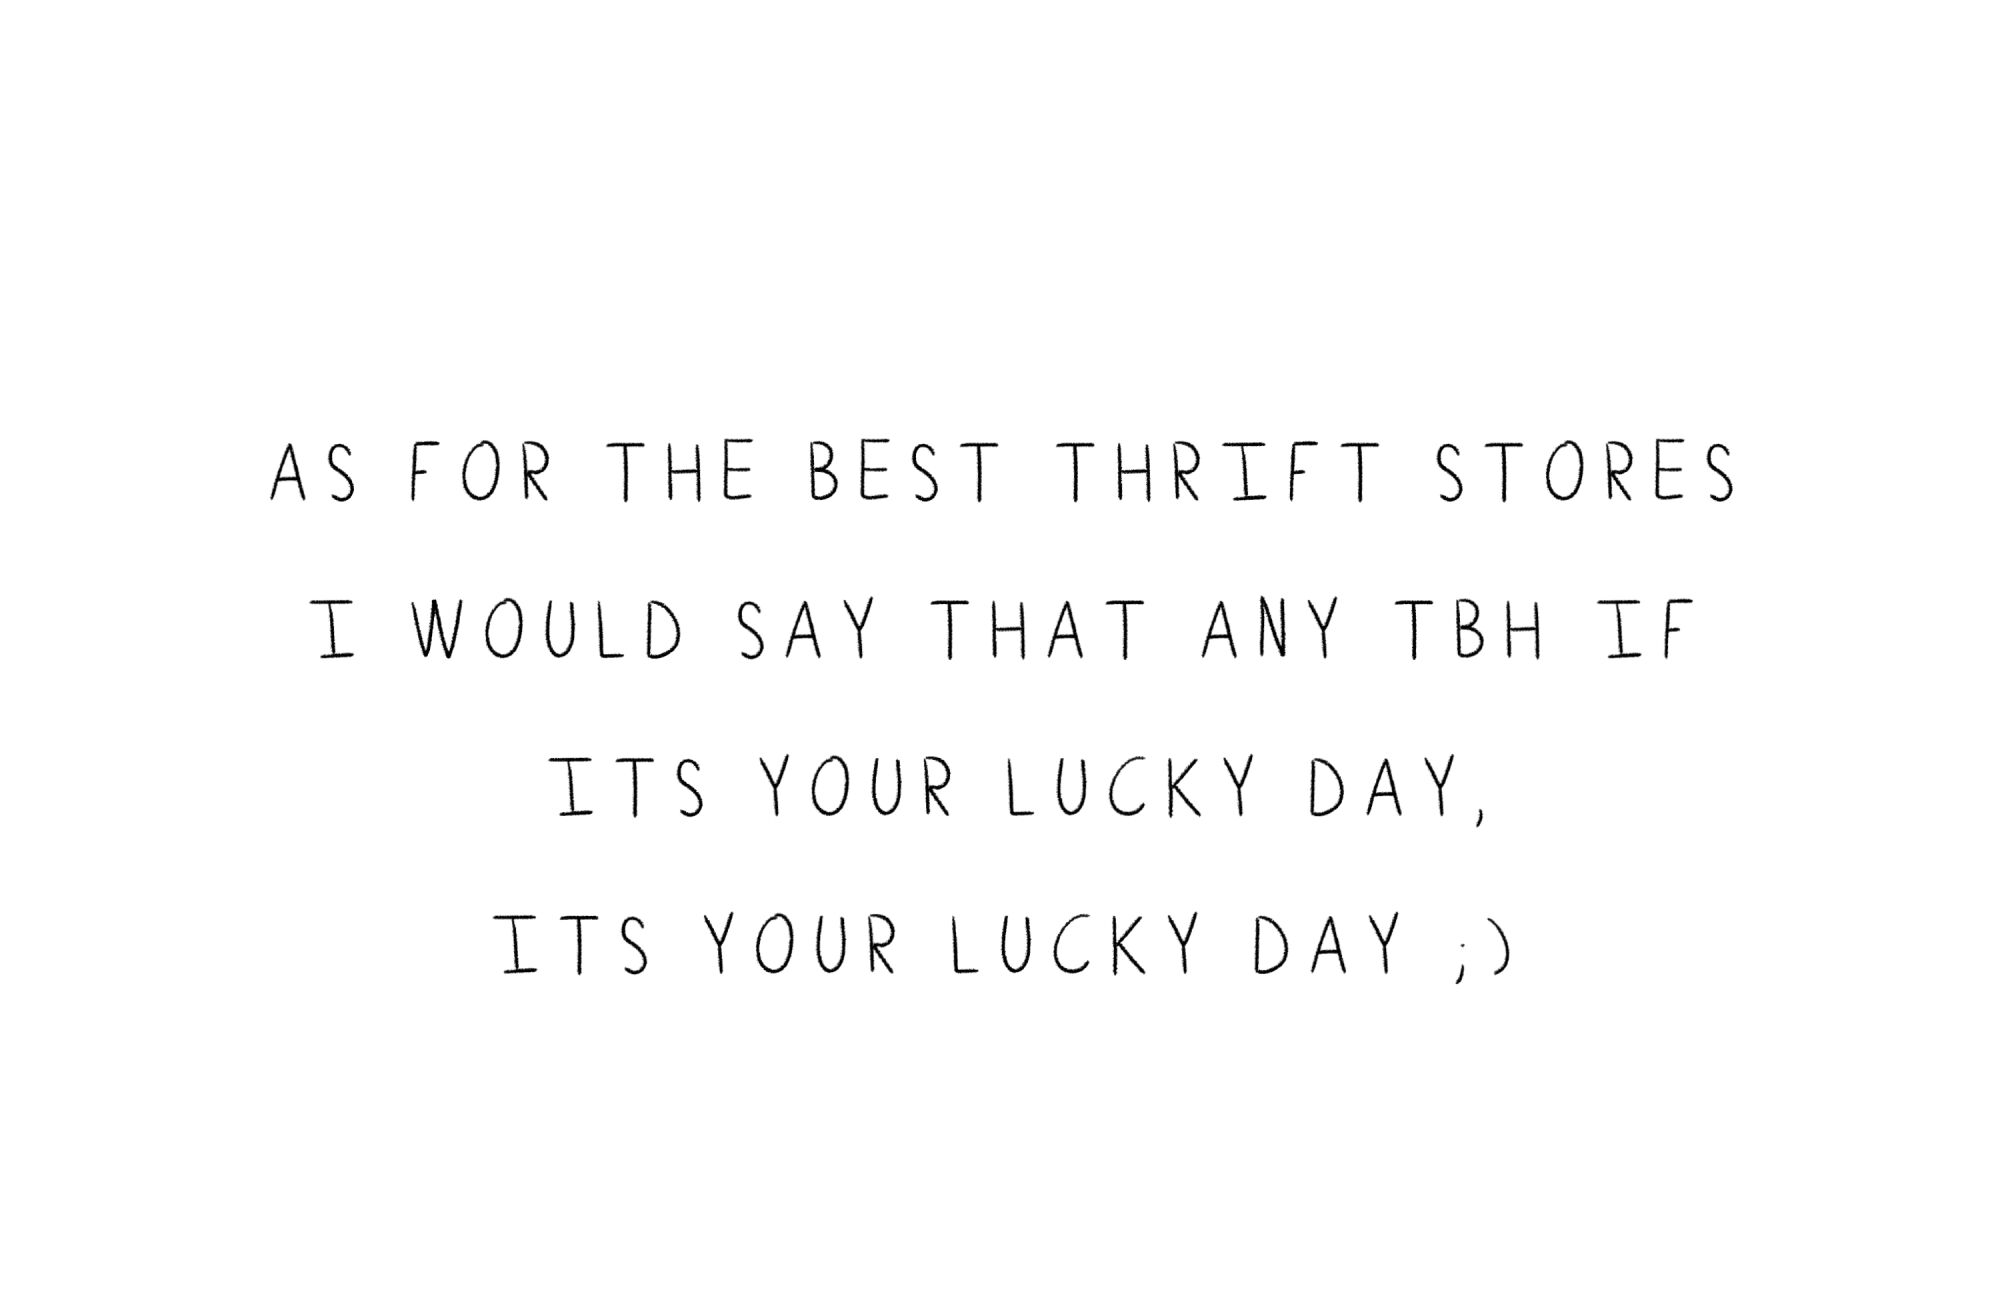 quote: As for the best thrift stores I would say that any tbh if its your lucky day, ITS YOUR LUCKY DAY ;).